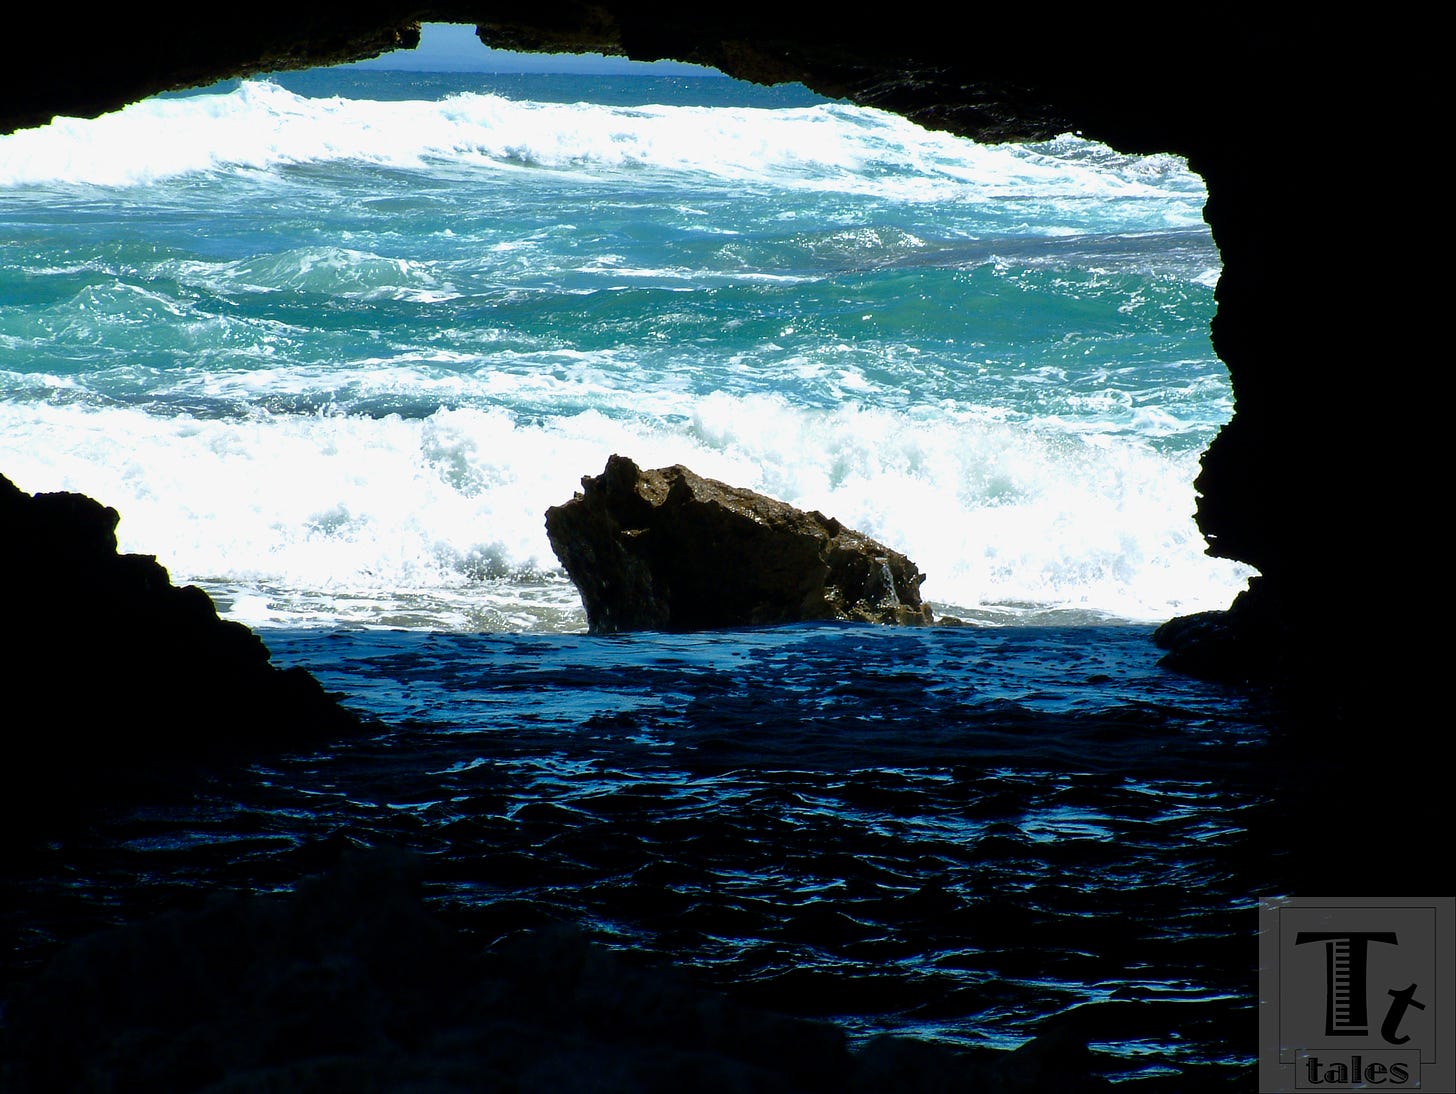 Boiling surf viewed from inside a dark cave